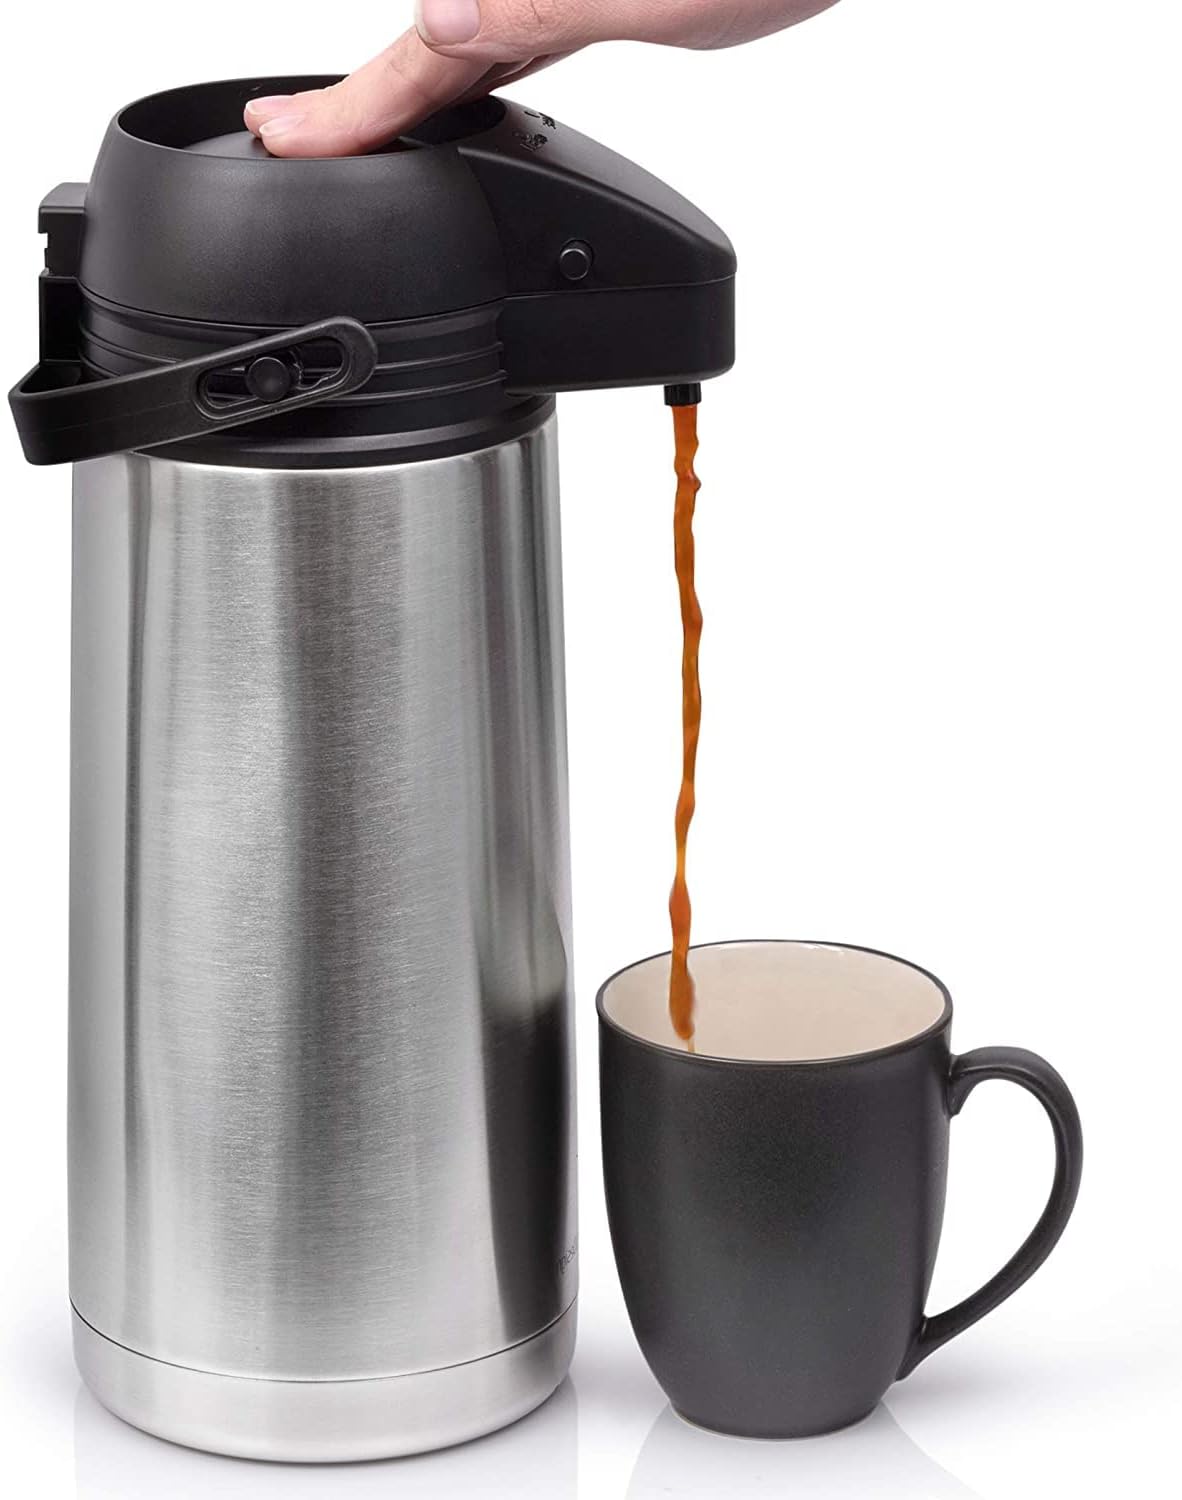 Simpli-Magic 79434 Airpot Coffee Dispenser with Easy Push Button, Stainless Steel, Double-Wall Vacuum Insulated Thermos